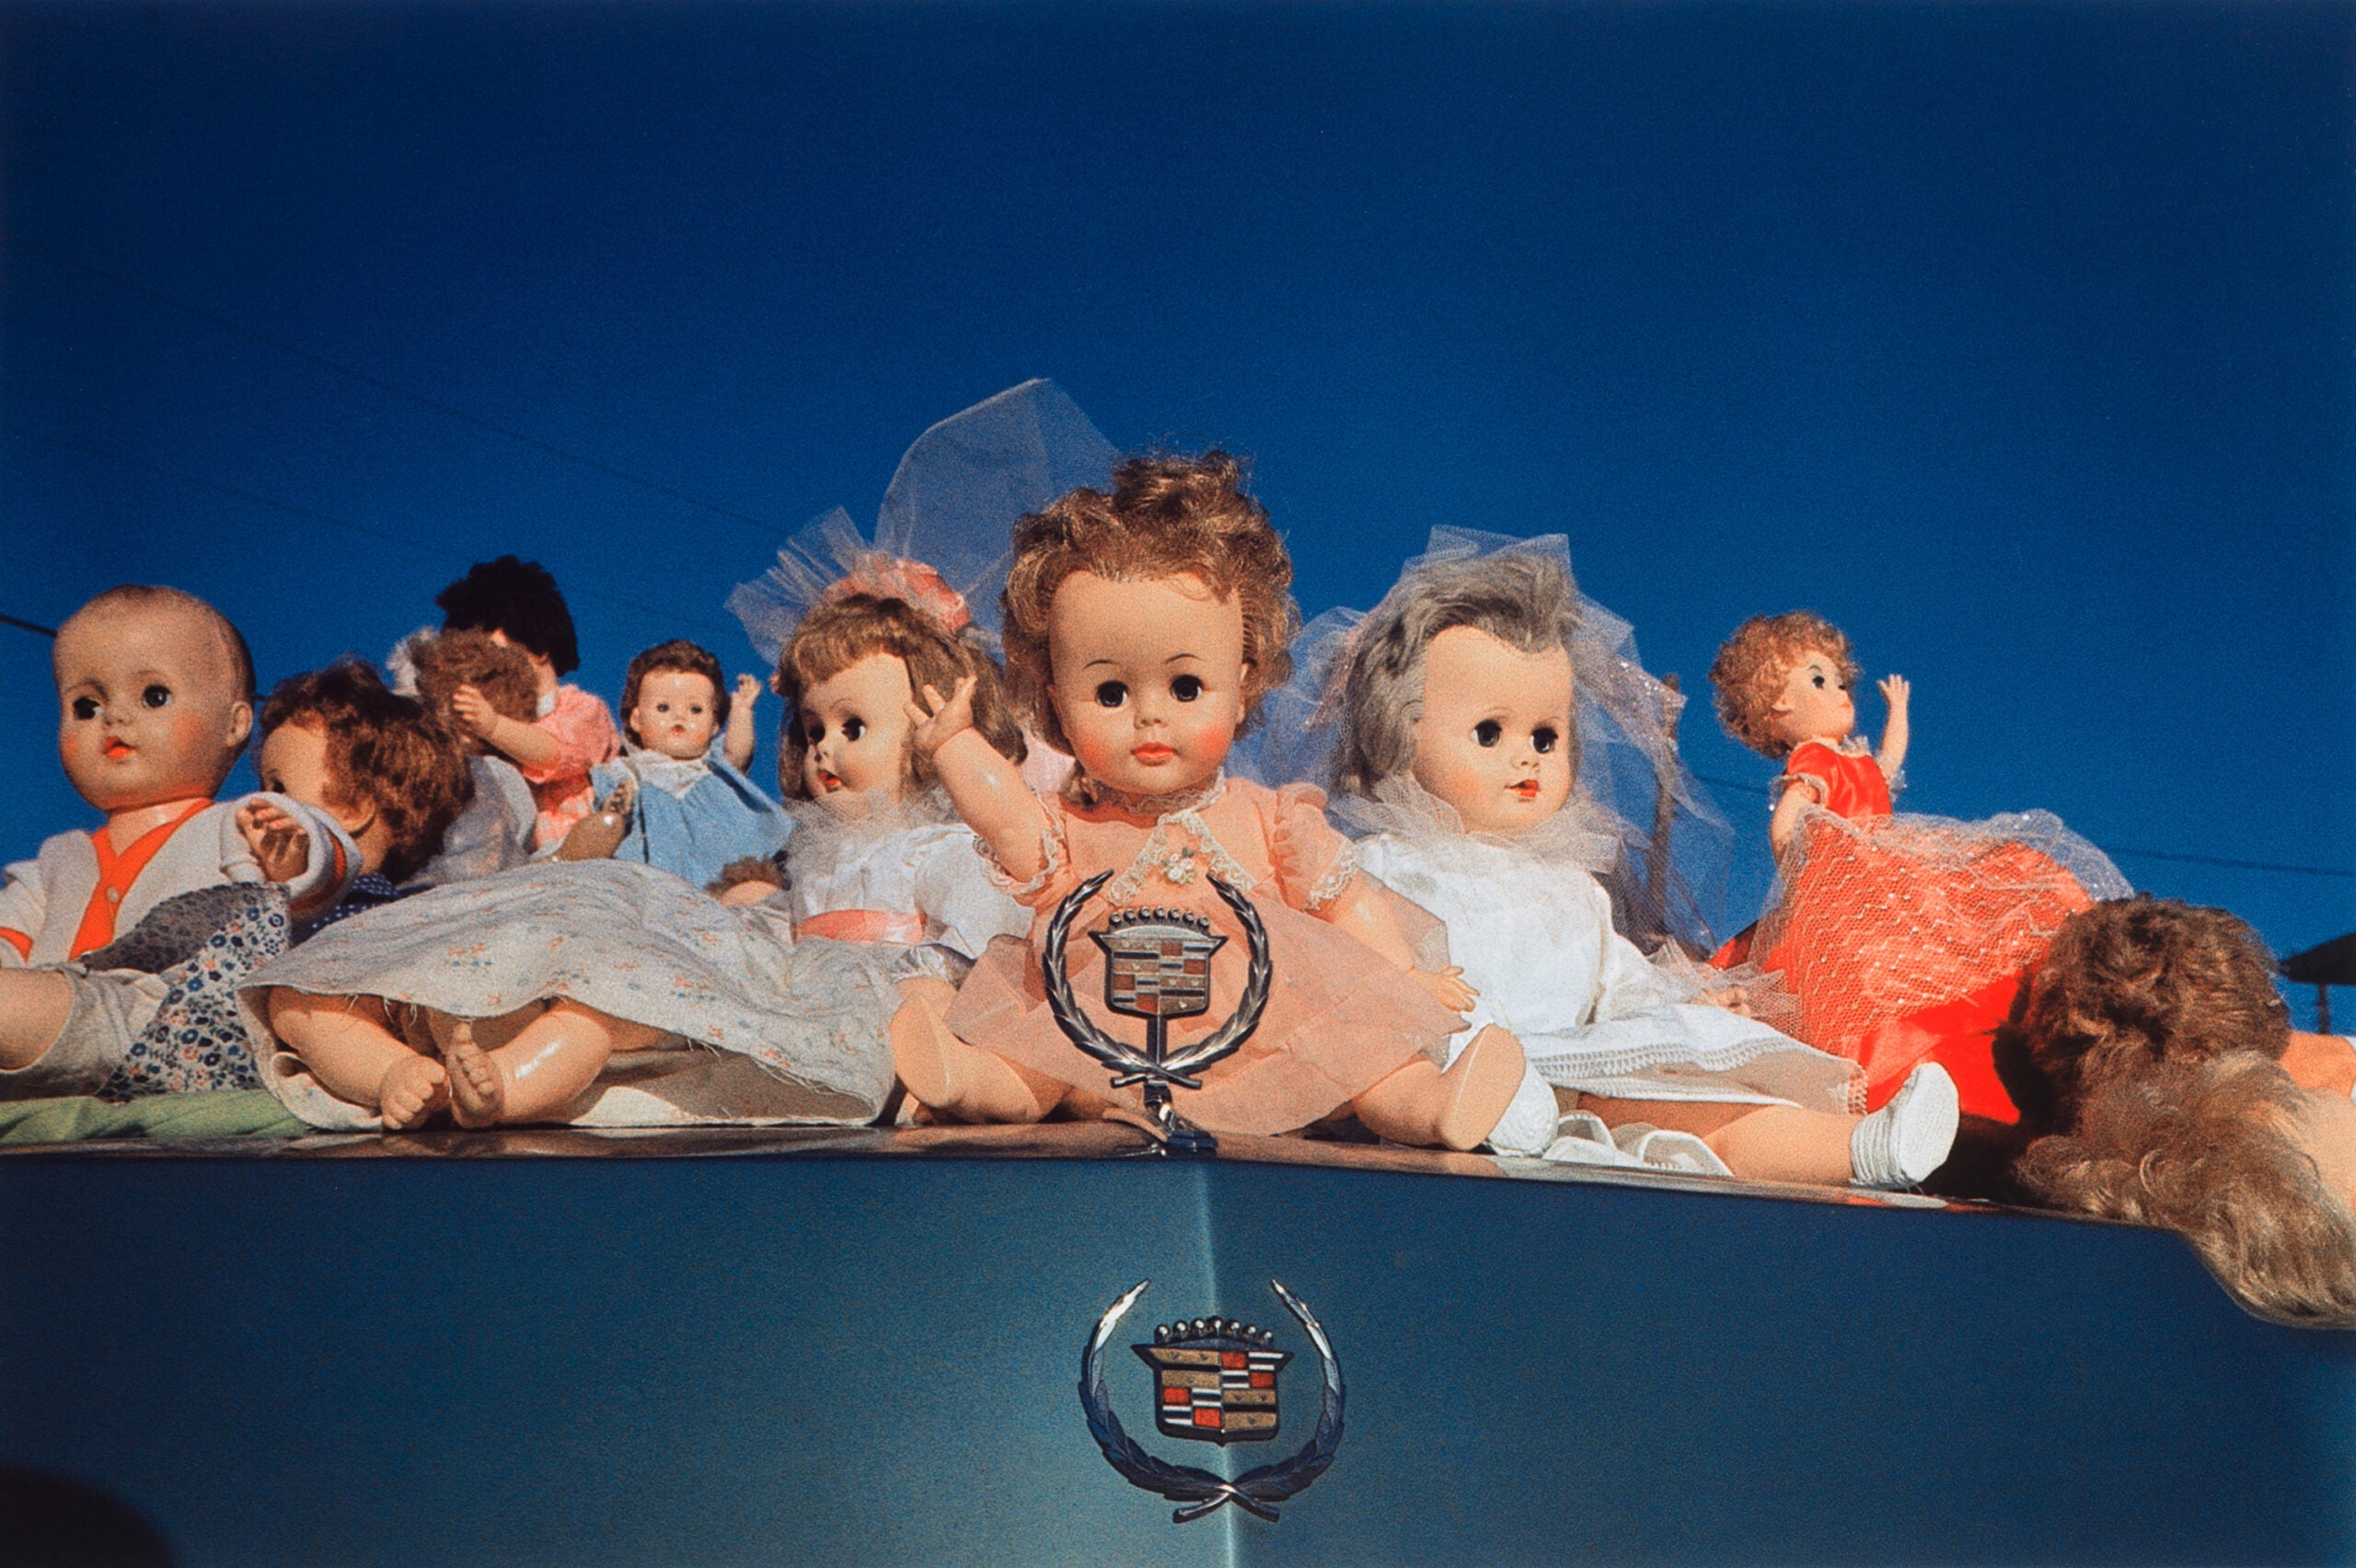 Untitled (Baby Doll Cadillac, Memphis, Tennessee), 1973, from 10.D.70.V2 Portfolio. Dye transfer print, 1996, 11 7/8 x 17 ¾ inches.